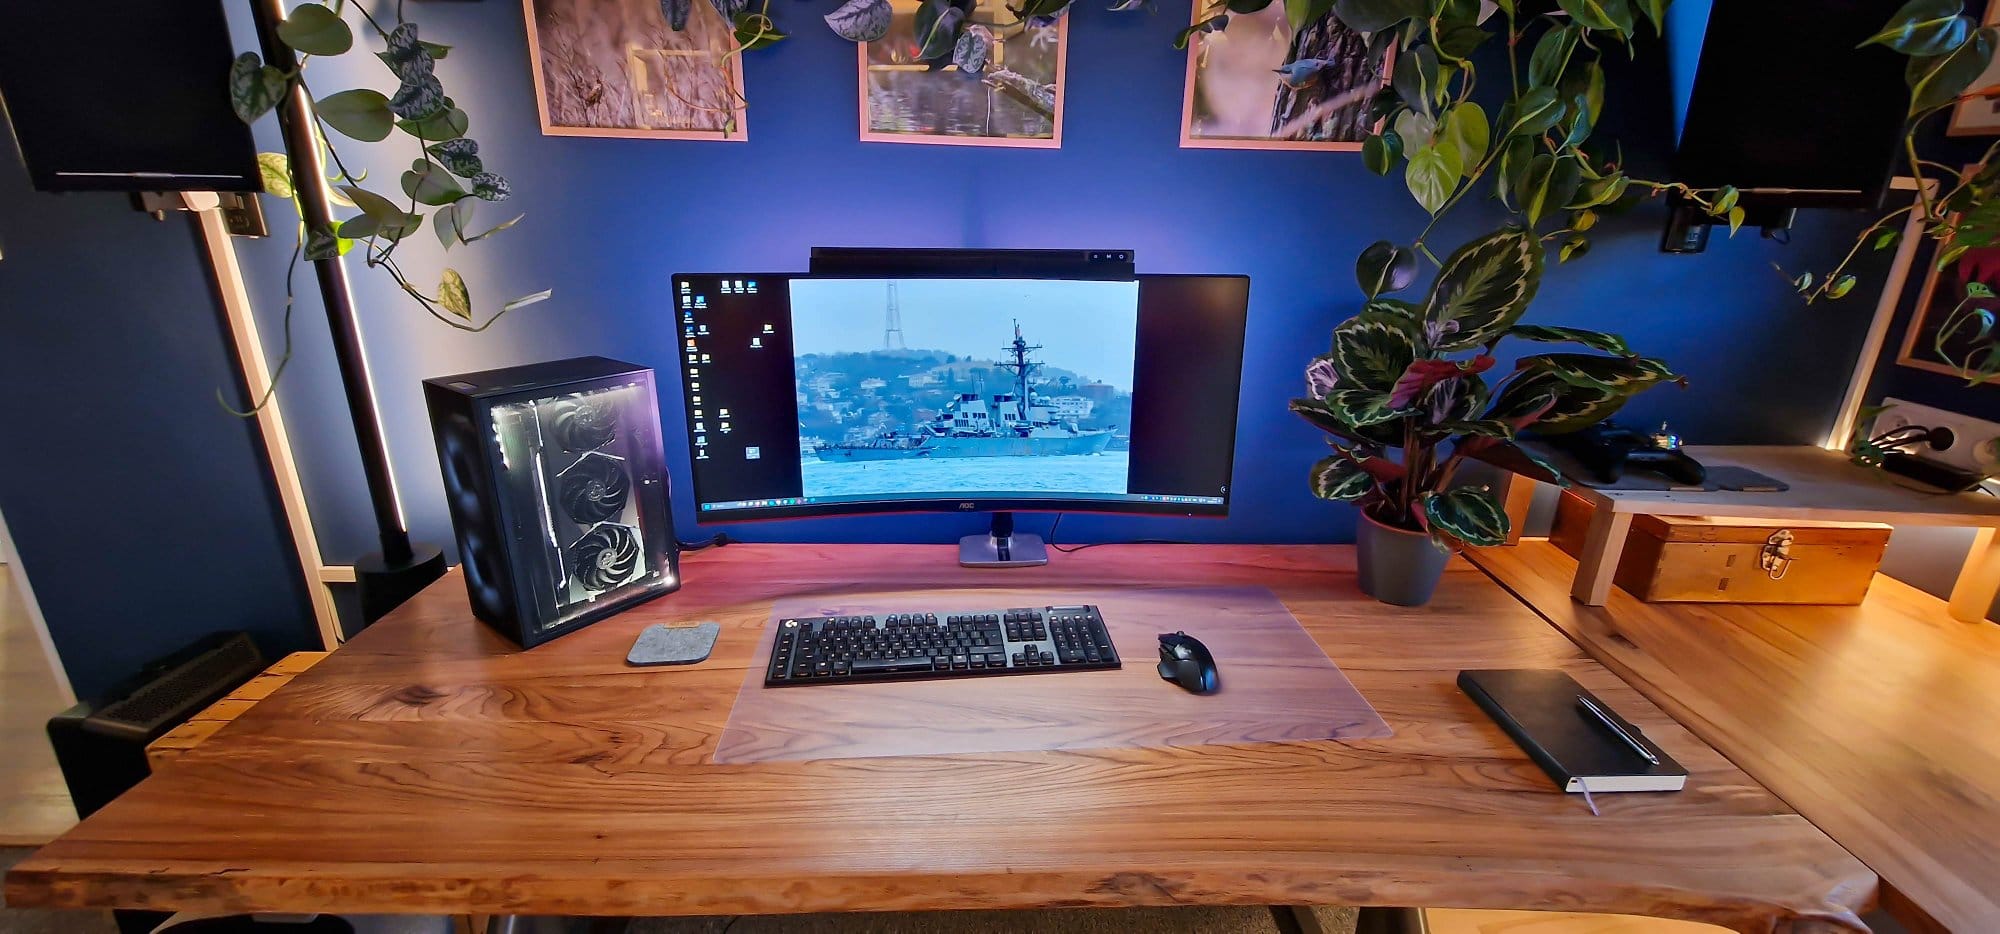 A meticulously arranged home office setup featuring a wide wooden desk with modern tech equipment, flanked by lush houseplants